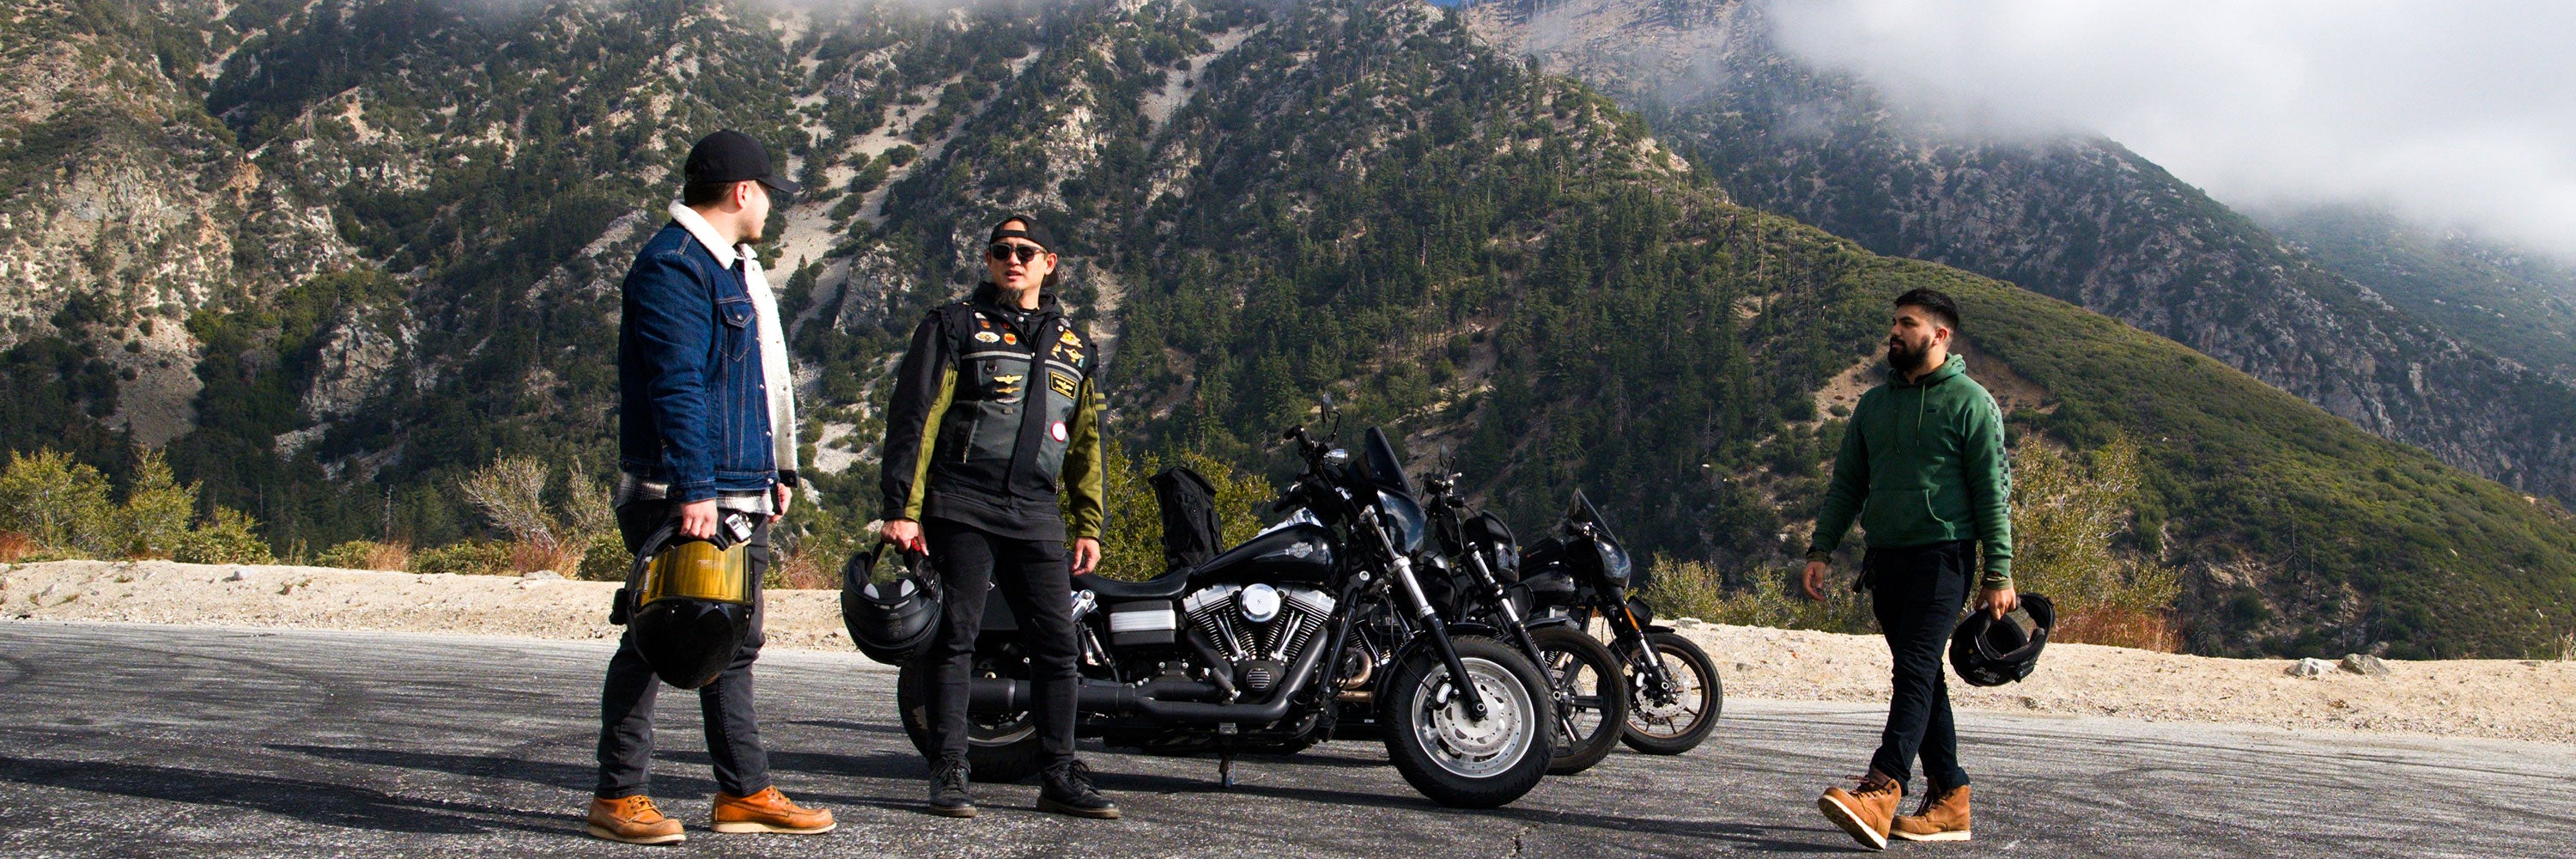 Victory All Motorcycle Luggage Bags, Parts & Accessories By Bike